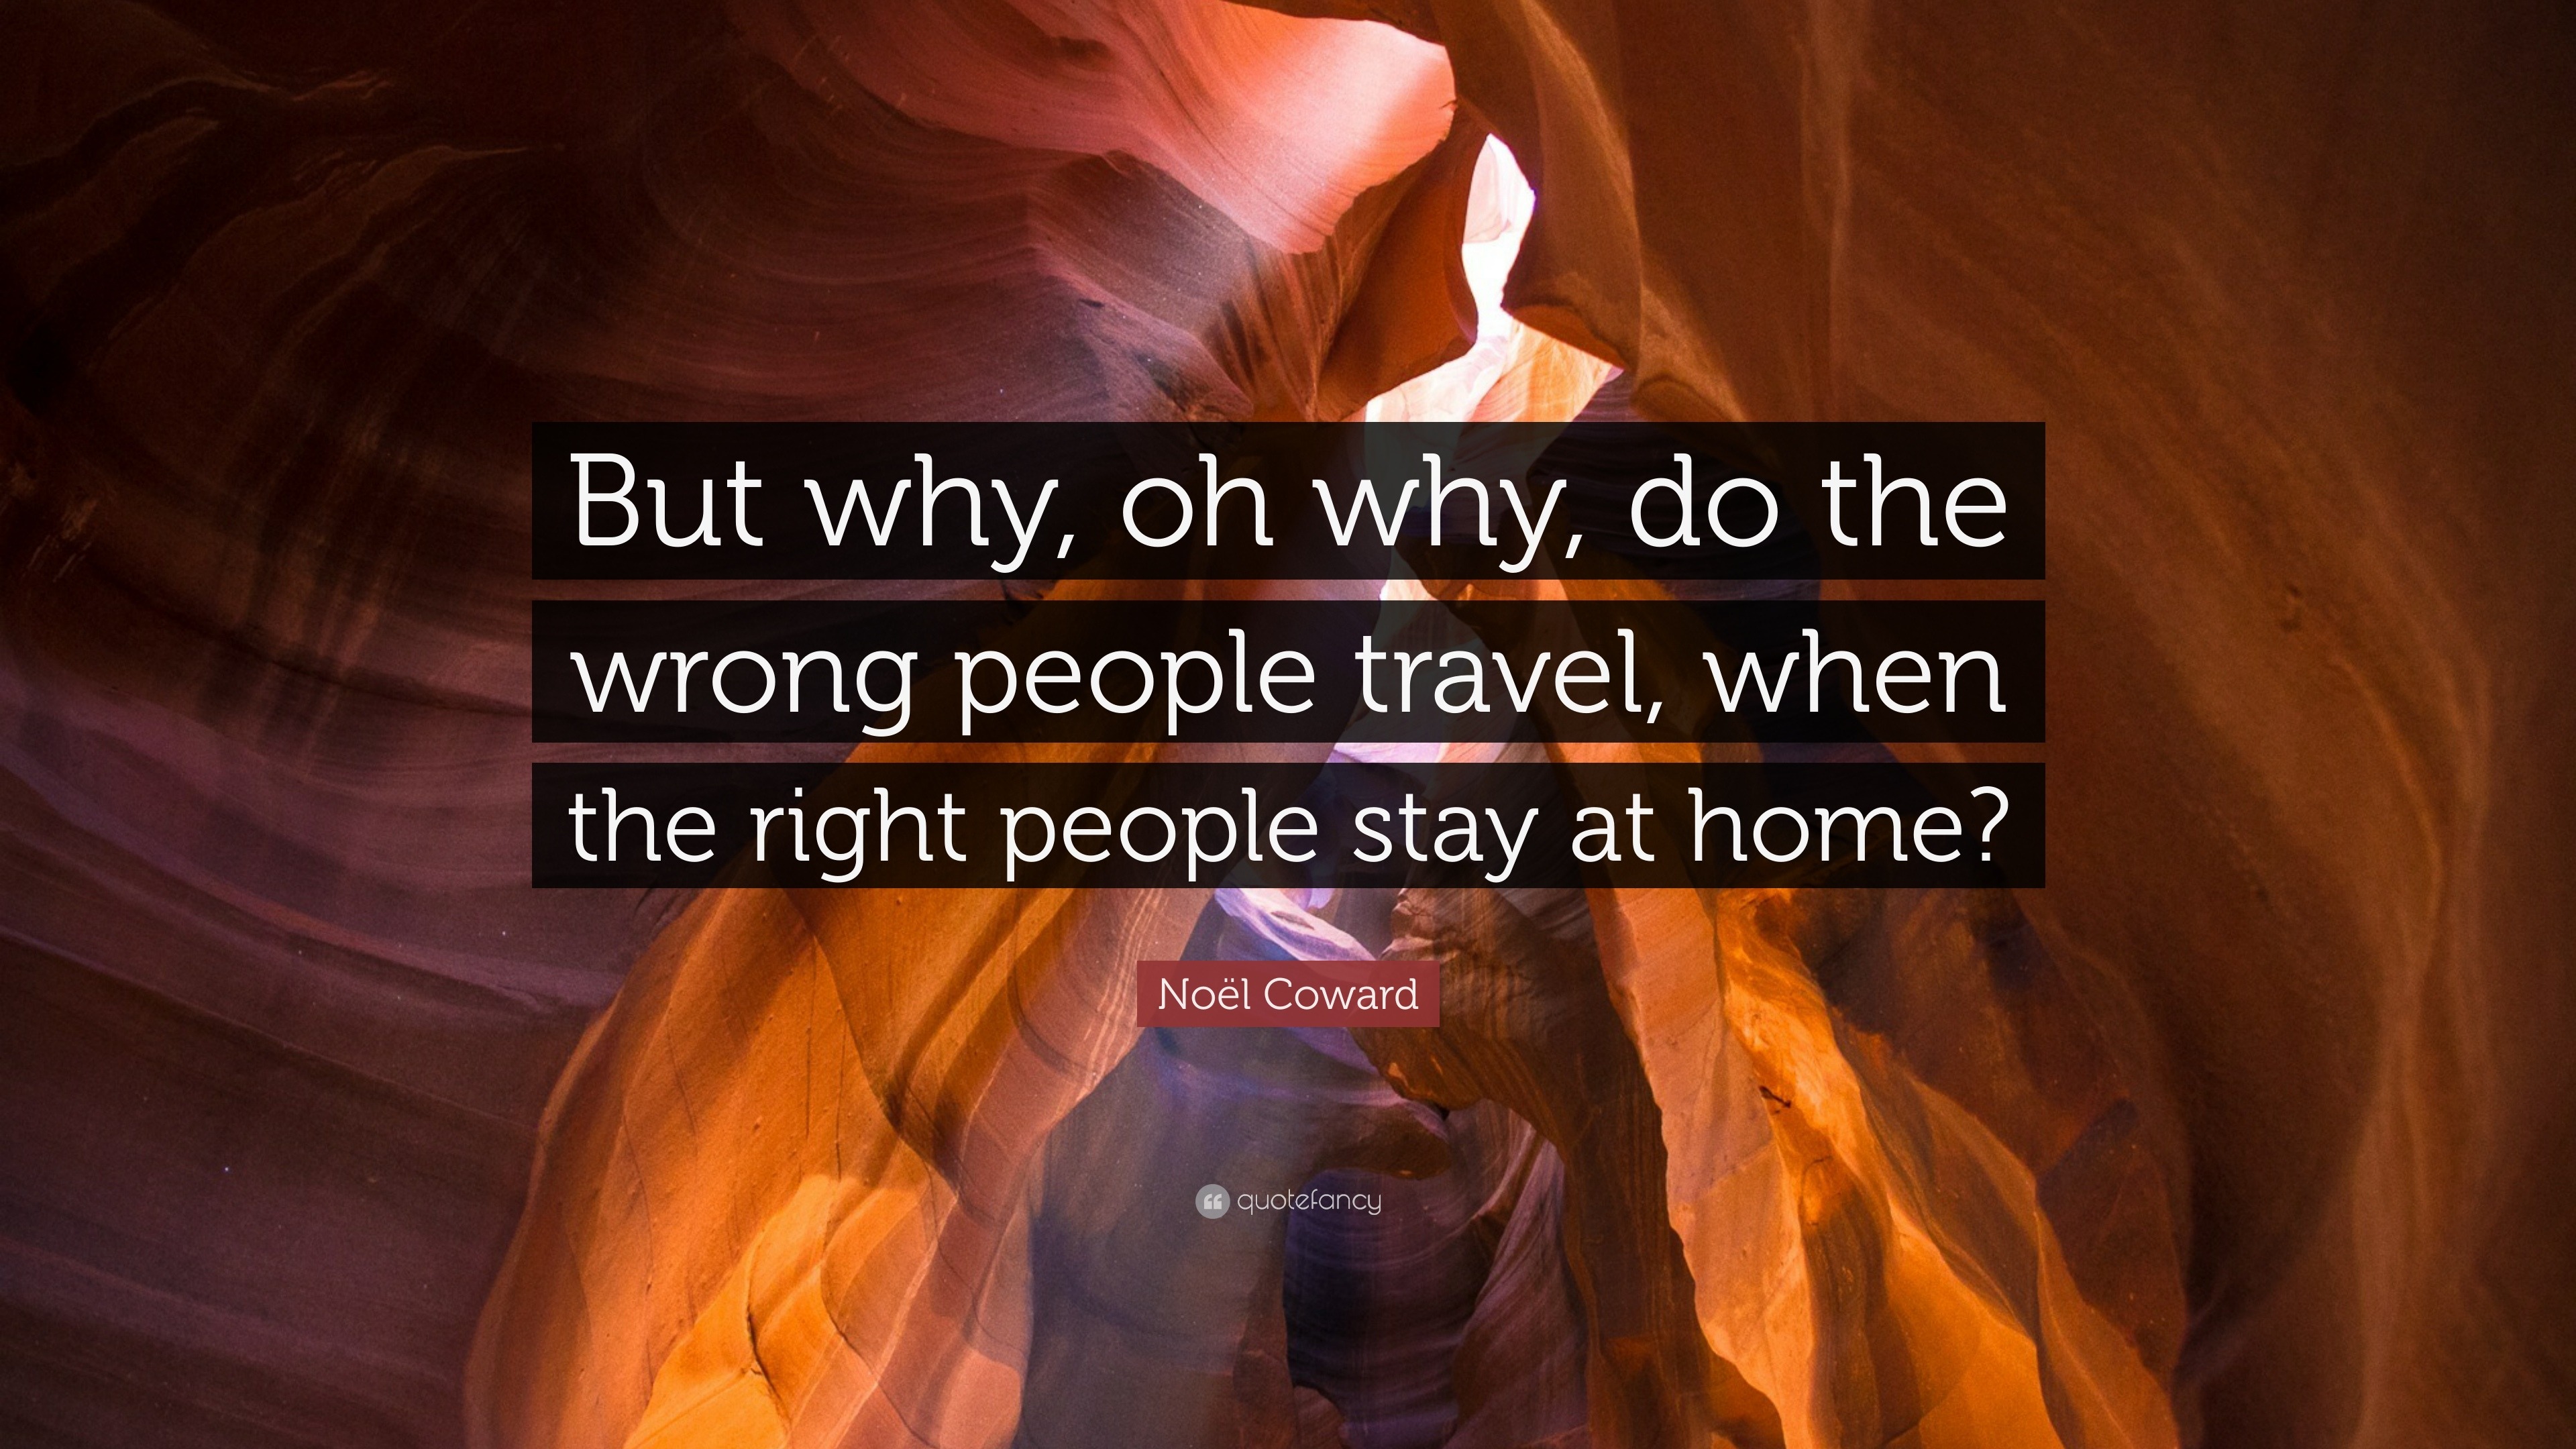 Noël Coward Quote: “But why, oh why, do the wrong people travel, when